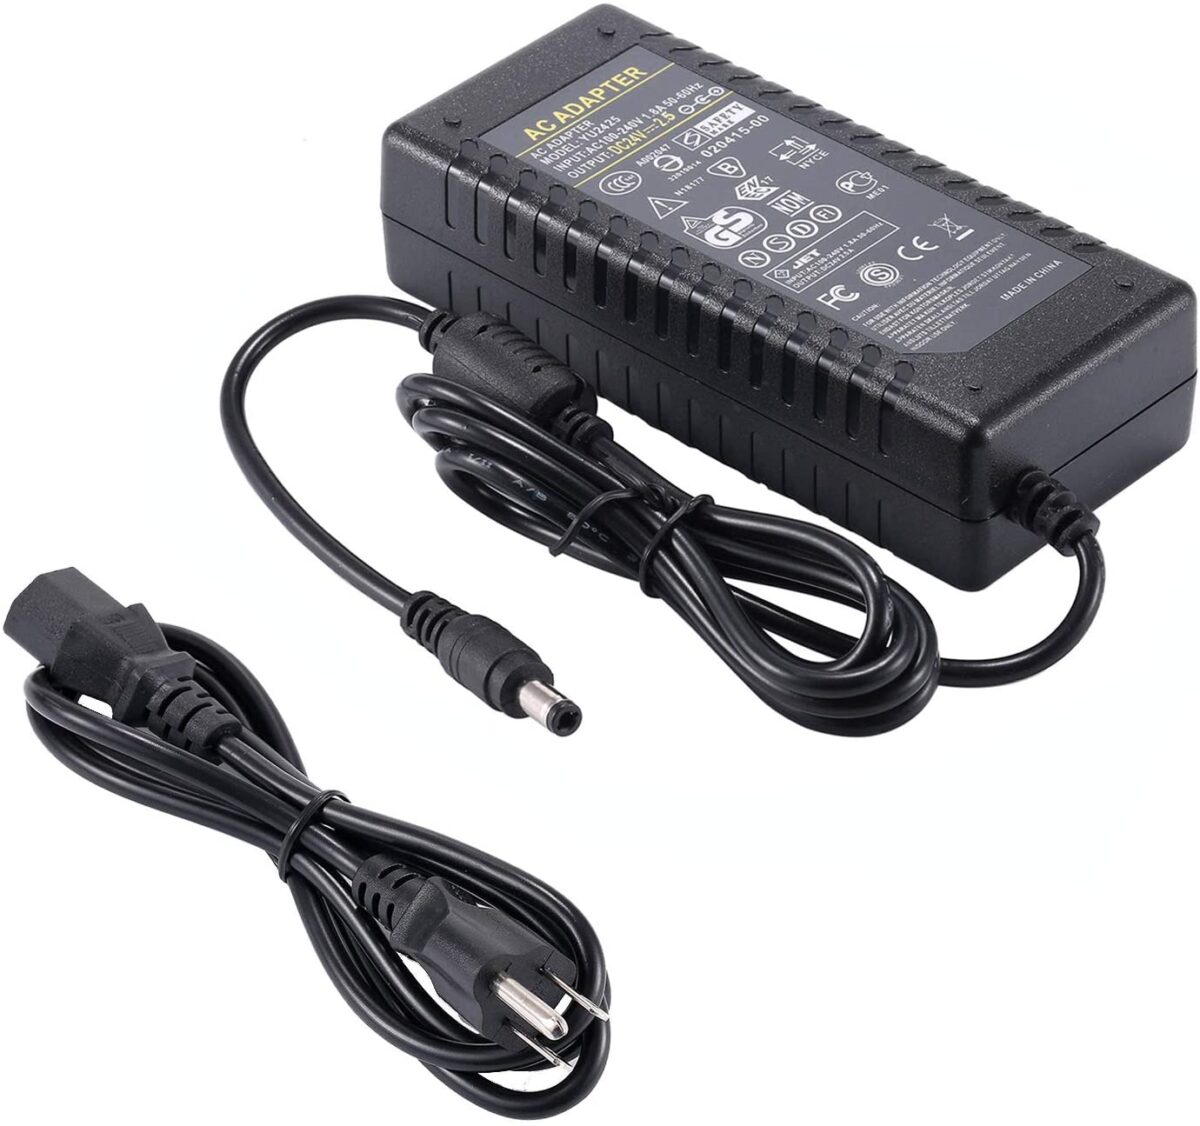 DC Power Supply Adapter, Dc power supply adapter plugs, Dc power supply adapter, Dc power supply adapter price, Dc power cord adapter, Dc power source adapter, Dc power supply connector, Dc power supply adaptor, Dc power adapter tips, What is a 12v dc plug, Dc power supply examples, Dc power supply near me, Dc power cord adapters, Dc power cord adapter types, Dc power cord adapter for dryer, 12v dc power supply adapter, Ac dc power supply adapter, 24v dc power supply adapter, Dc power connector types, Dc power supply adapter for sale,Dc power supply adapter in nairobi kenya, cheap Dc power supply adapter price